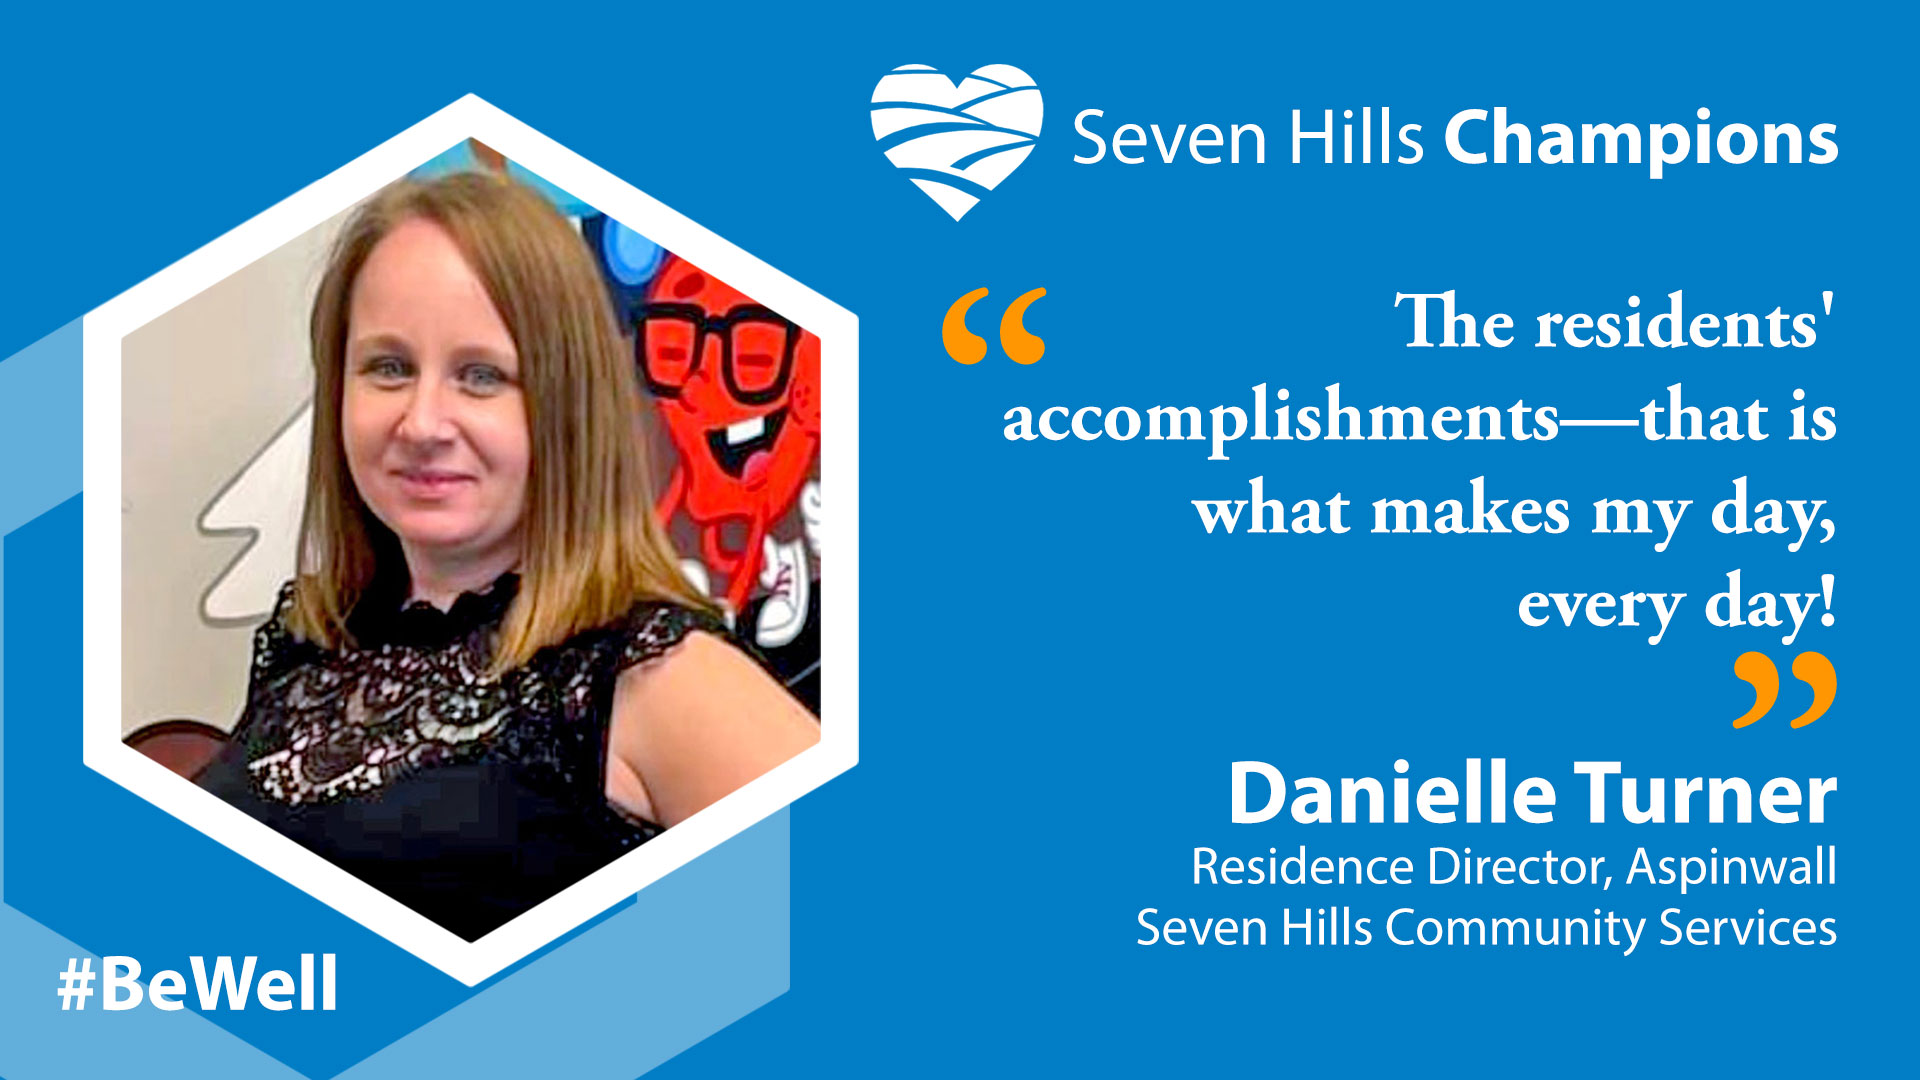 Introducing this Week's Seven Hills Champion: Danielle Turner